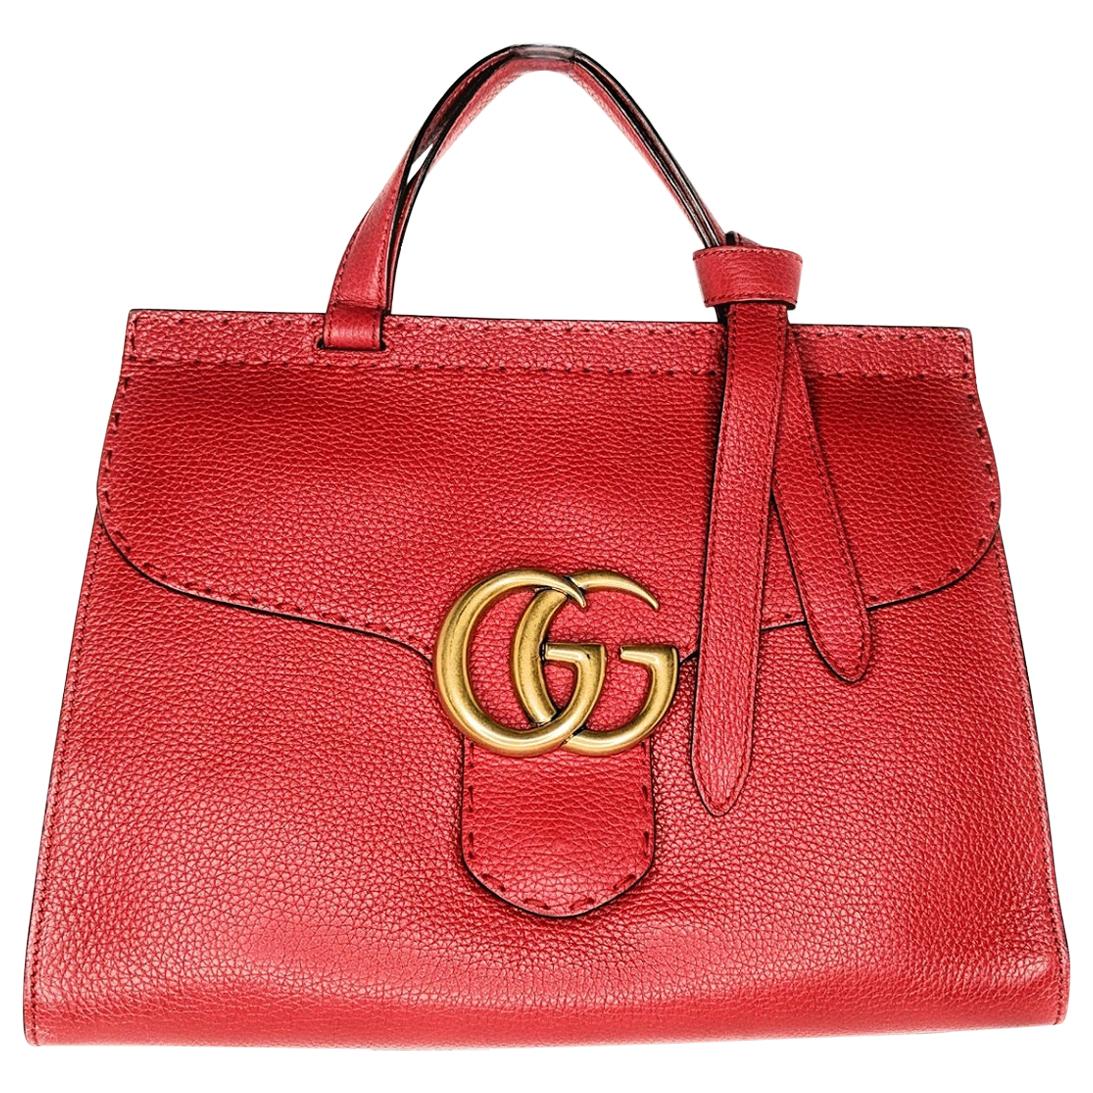 Gucci Red GG Marmont Top Handle Bag